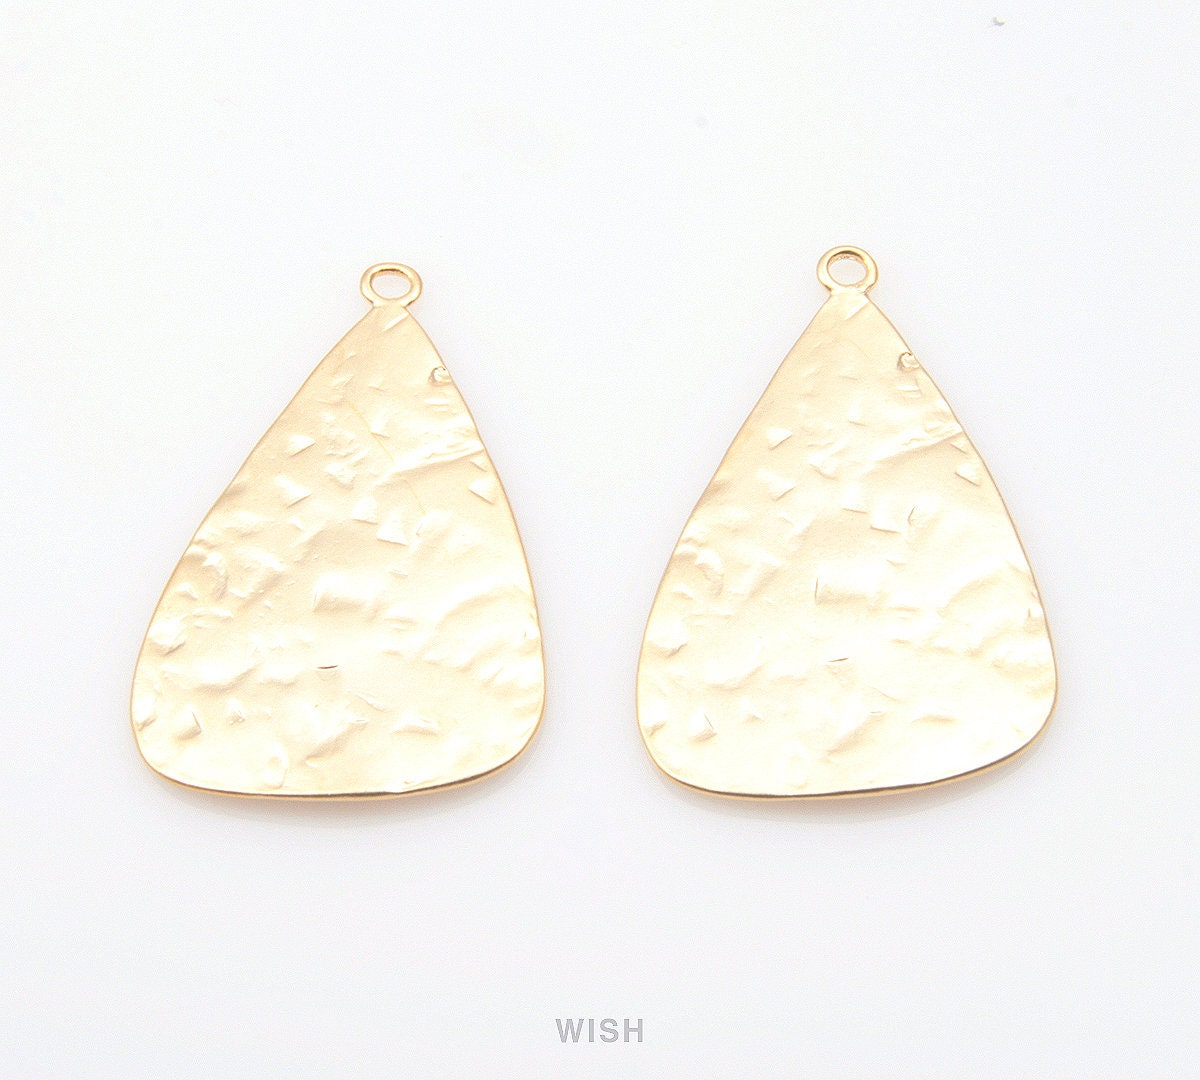 Hammered Triangle Pendants in Matte Gold Triangle Charms / - Etsy